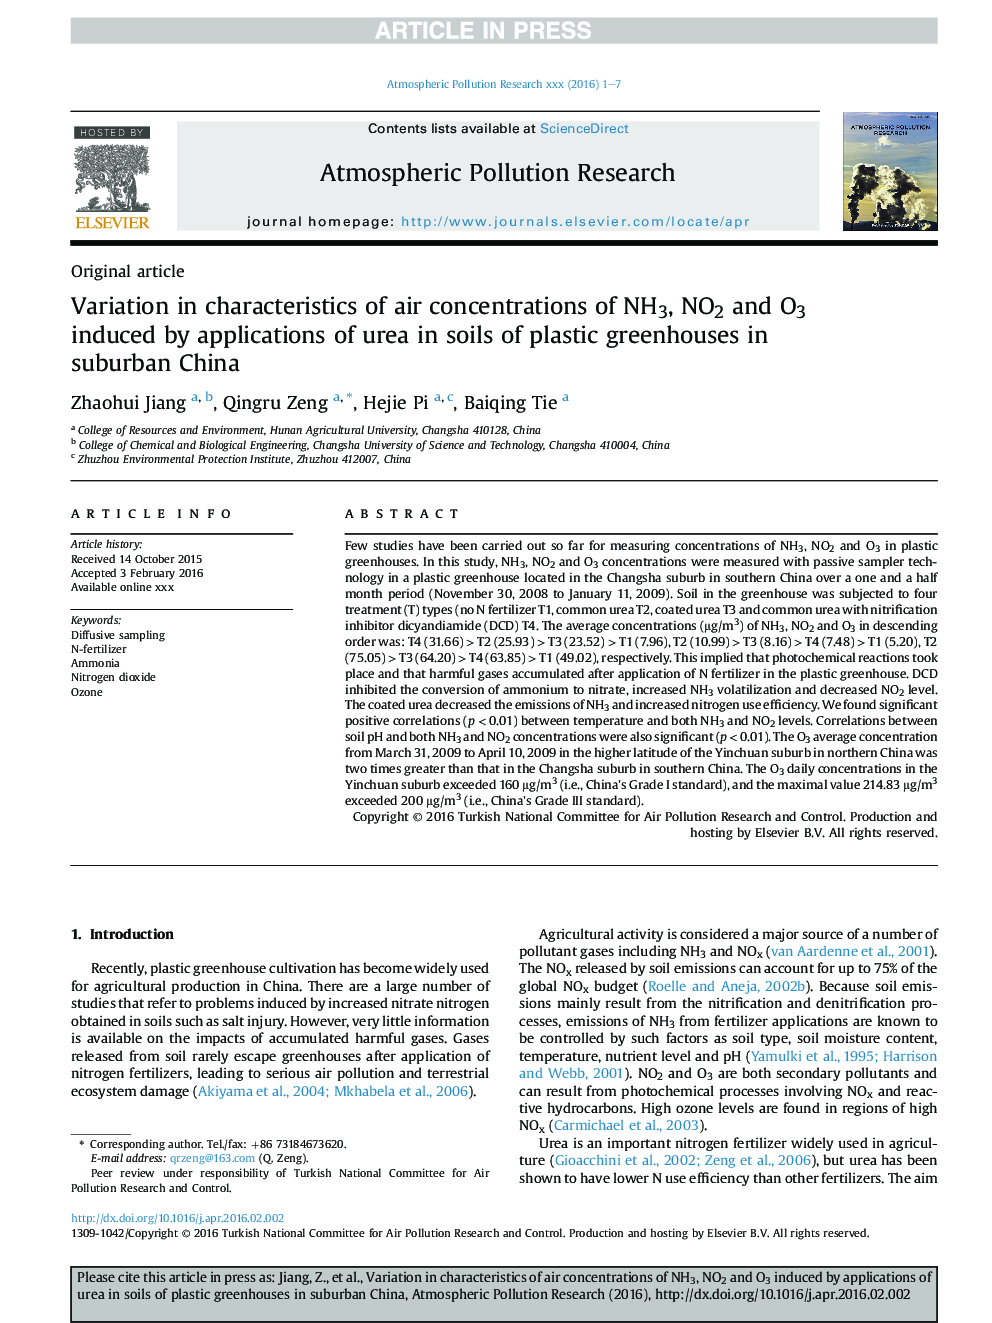 Variation in characteristics of air concentrations of NH3, NO2 and O3 induced by applications of urea in soils of plastic greenhouses in suburban China